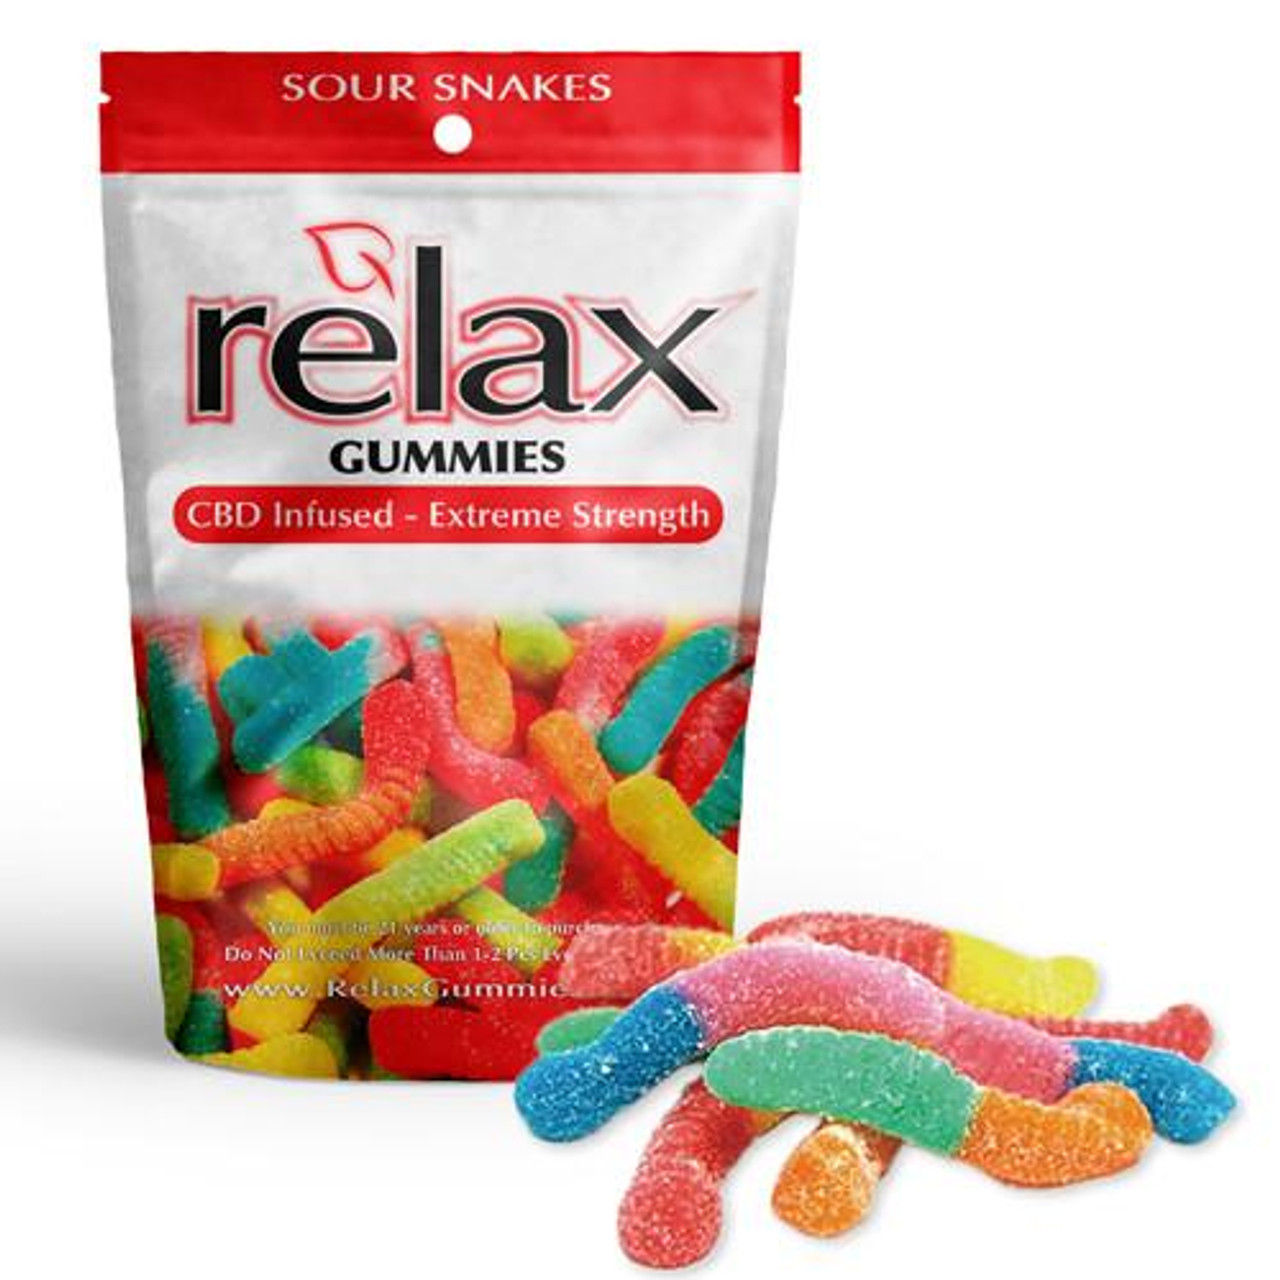 Chill Gummies - CBD Infused Sour Snakes [Edible Candy]